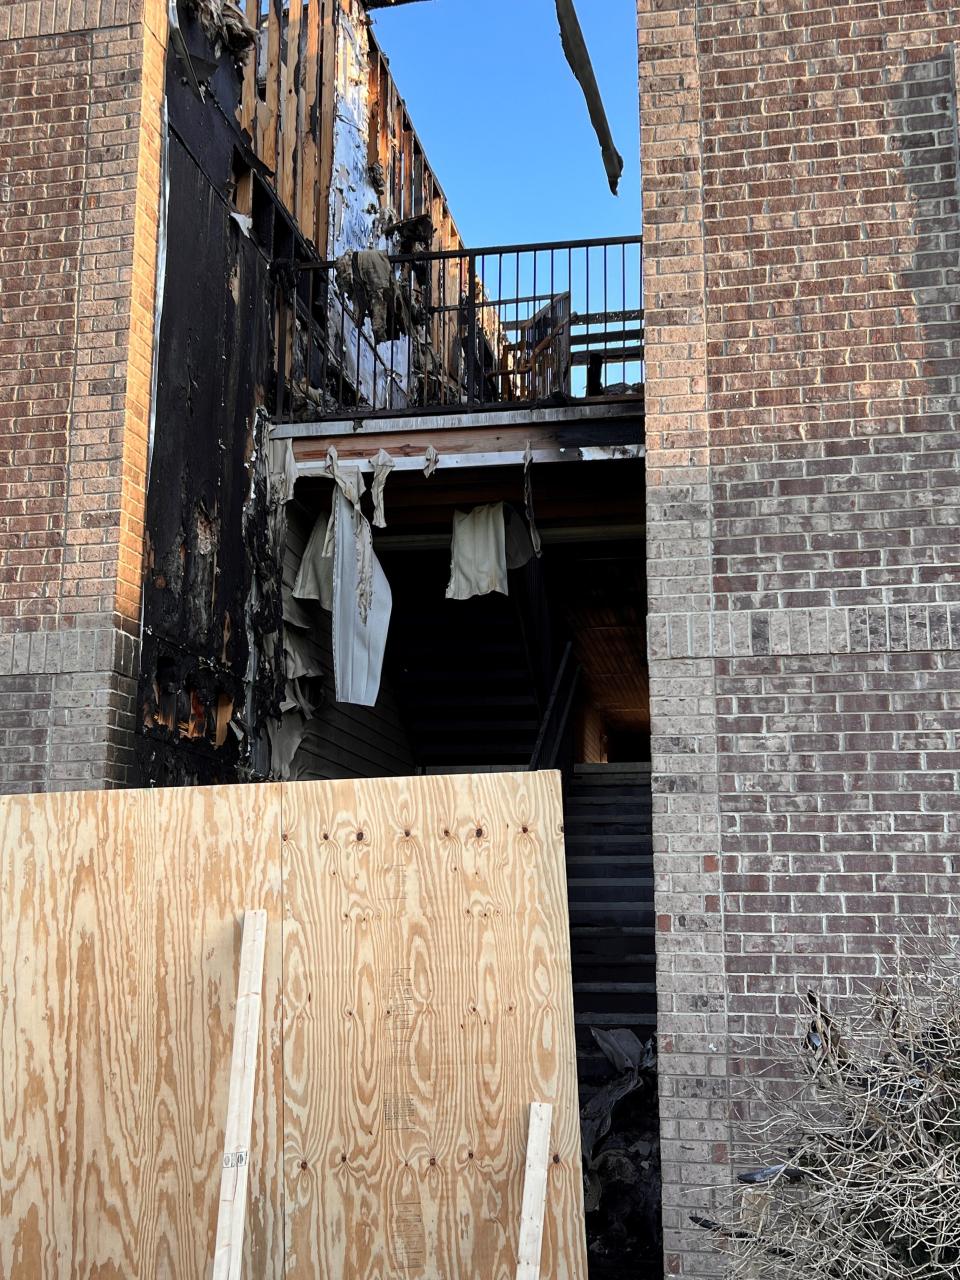 Fire at Glass Creek Village Apartments damaged 24 units on Aug. 12. The residents escaped harm, but one firefighter was injured.